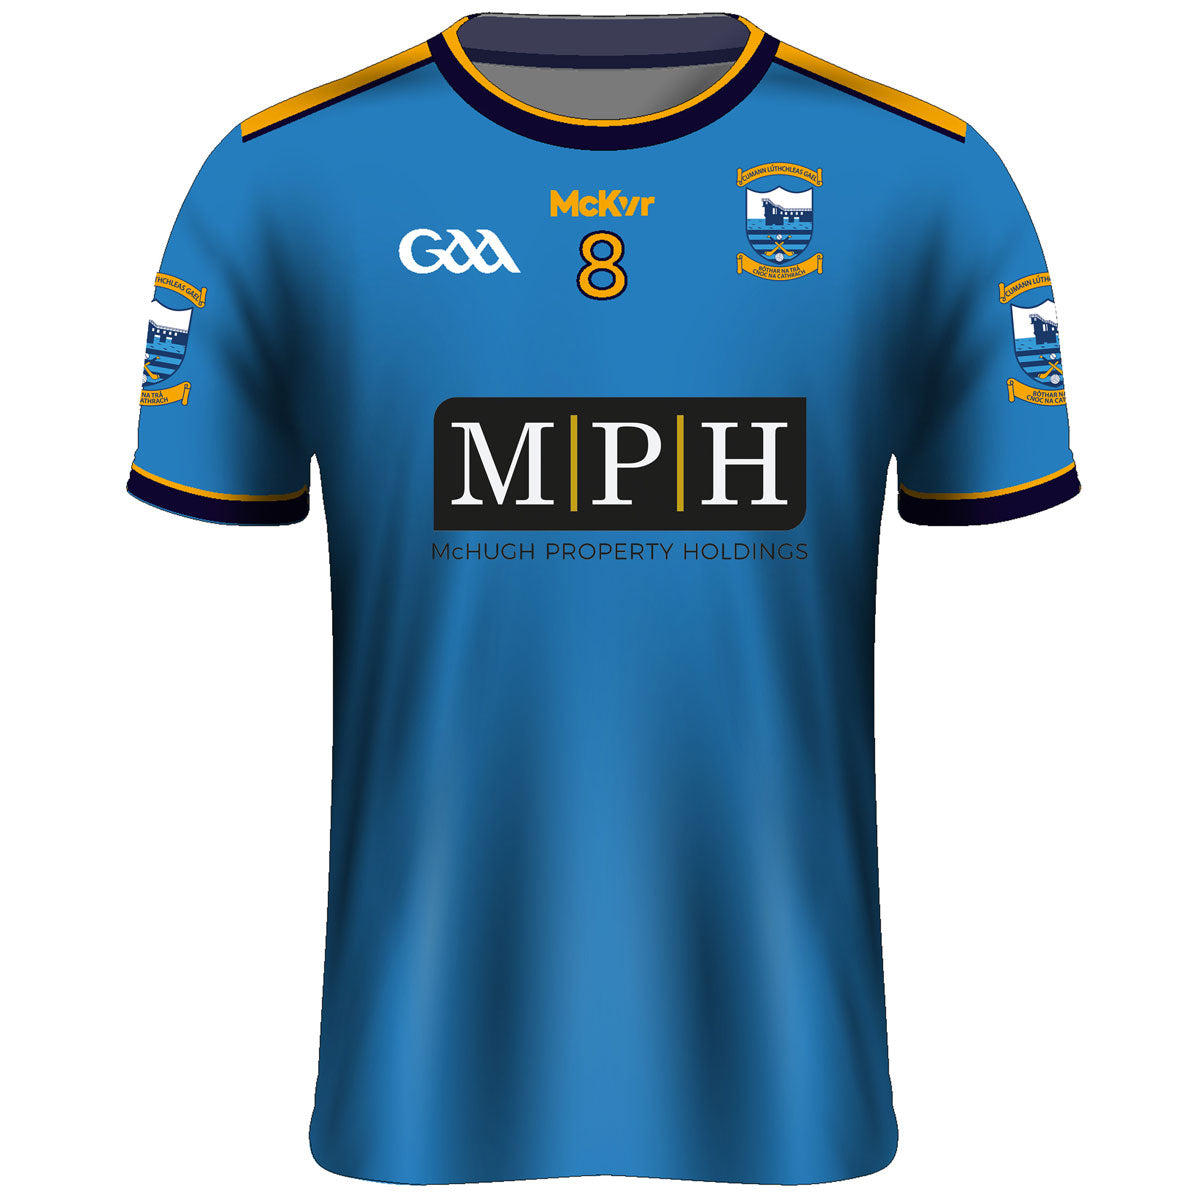 Mc Keever Salthill Knocknacarra GAA Numbered Home Jersey - Adult - Blue Player Fit